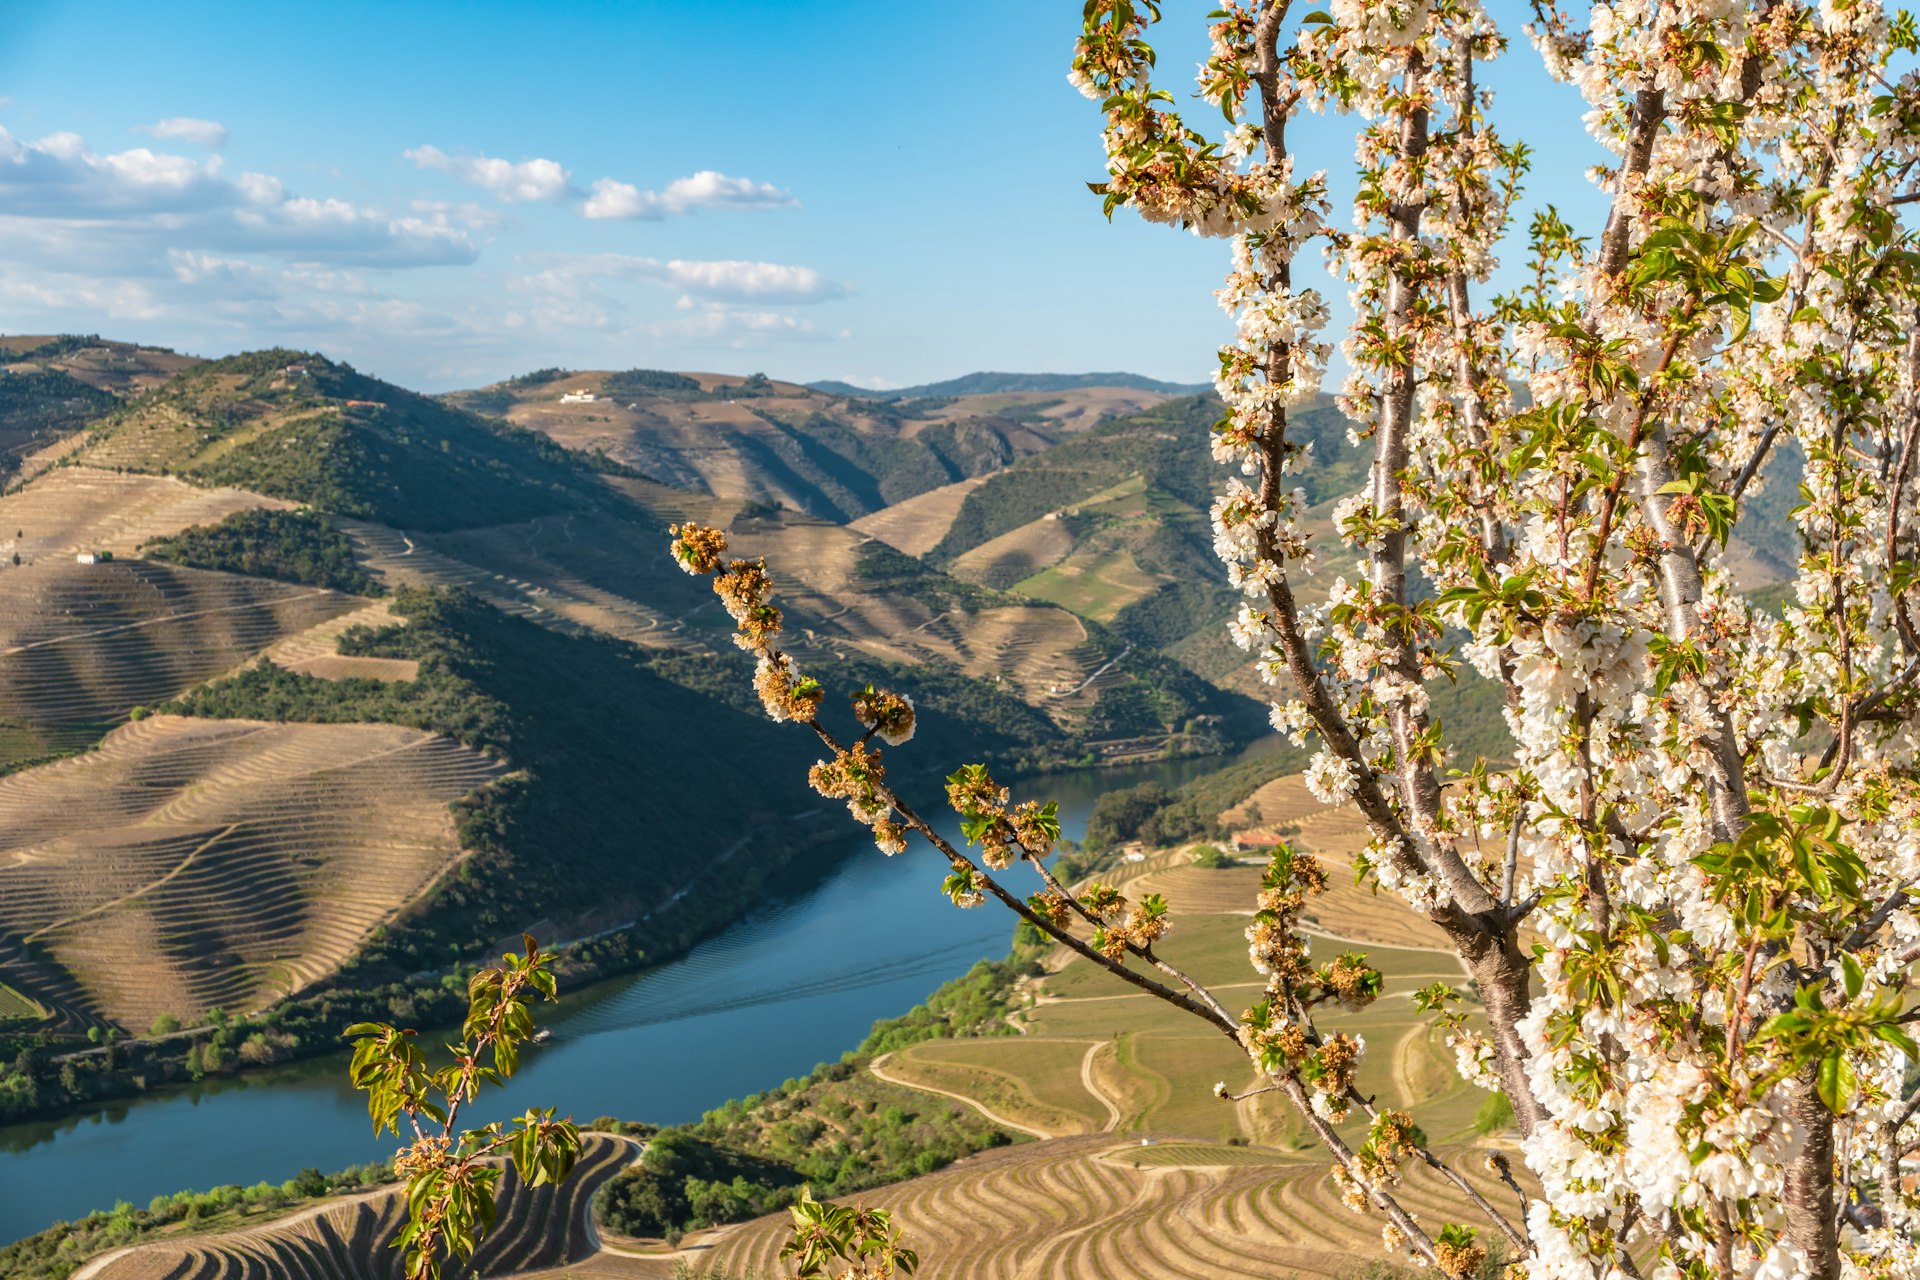 View of the terraced vineyards in the Douro Valley and river near the village of Pinhao, Portugal.